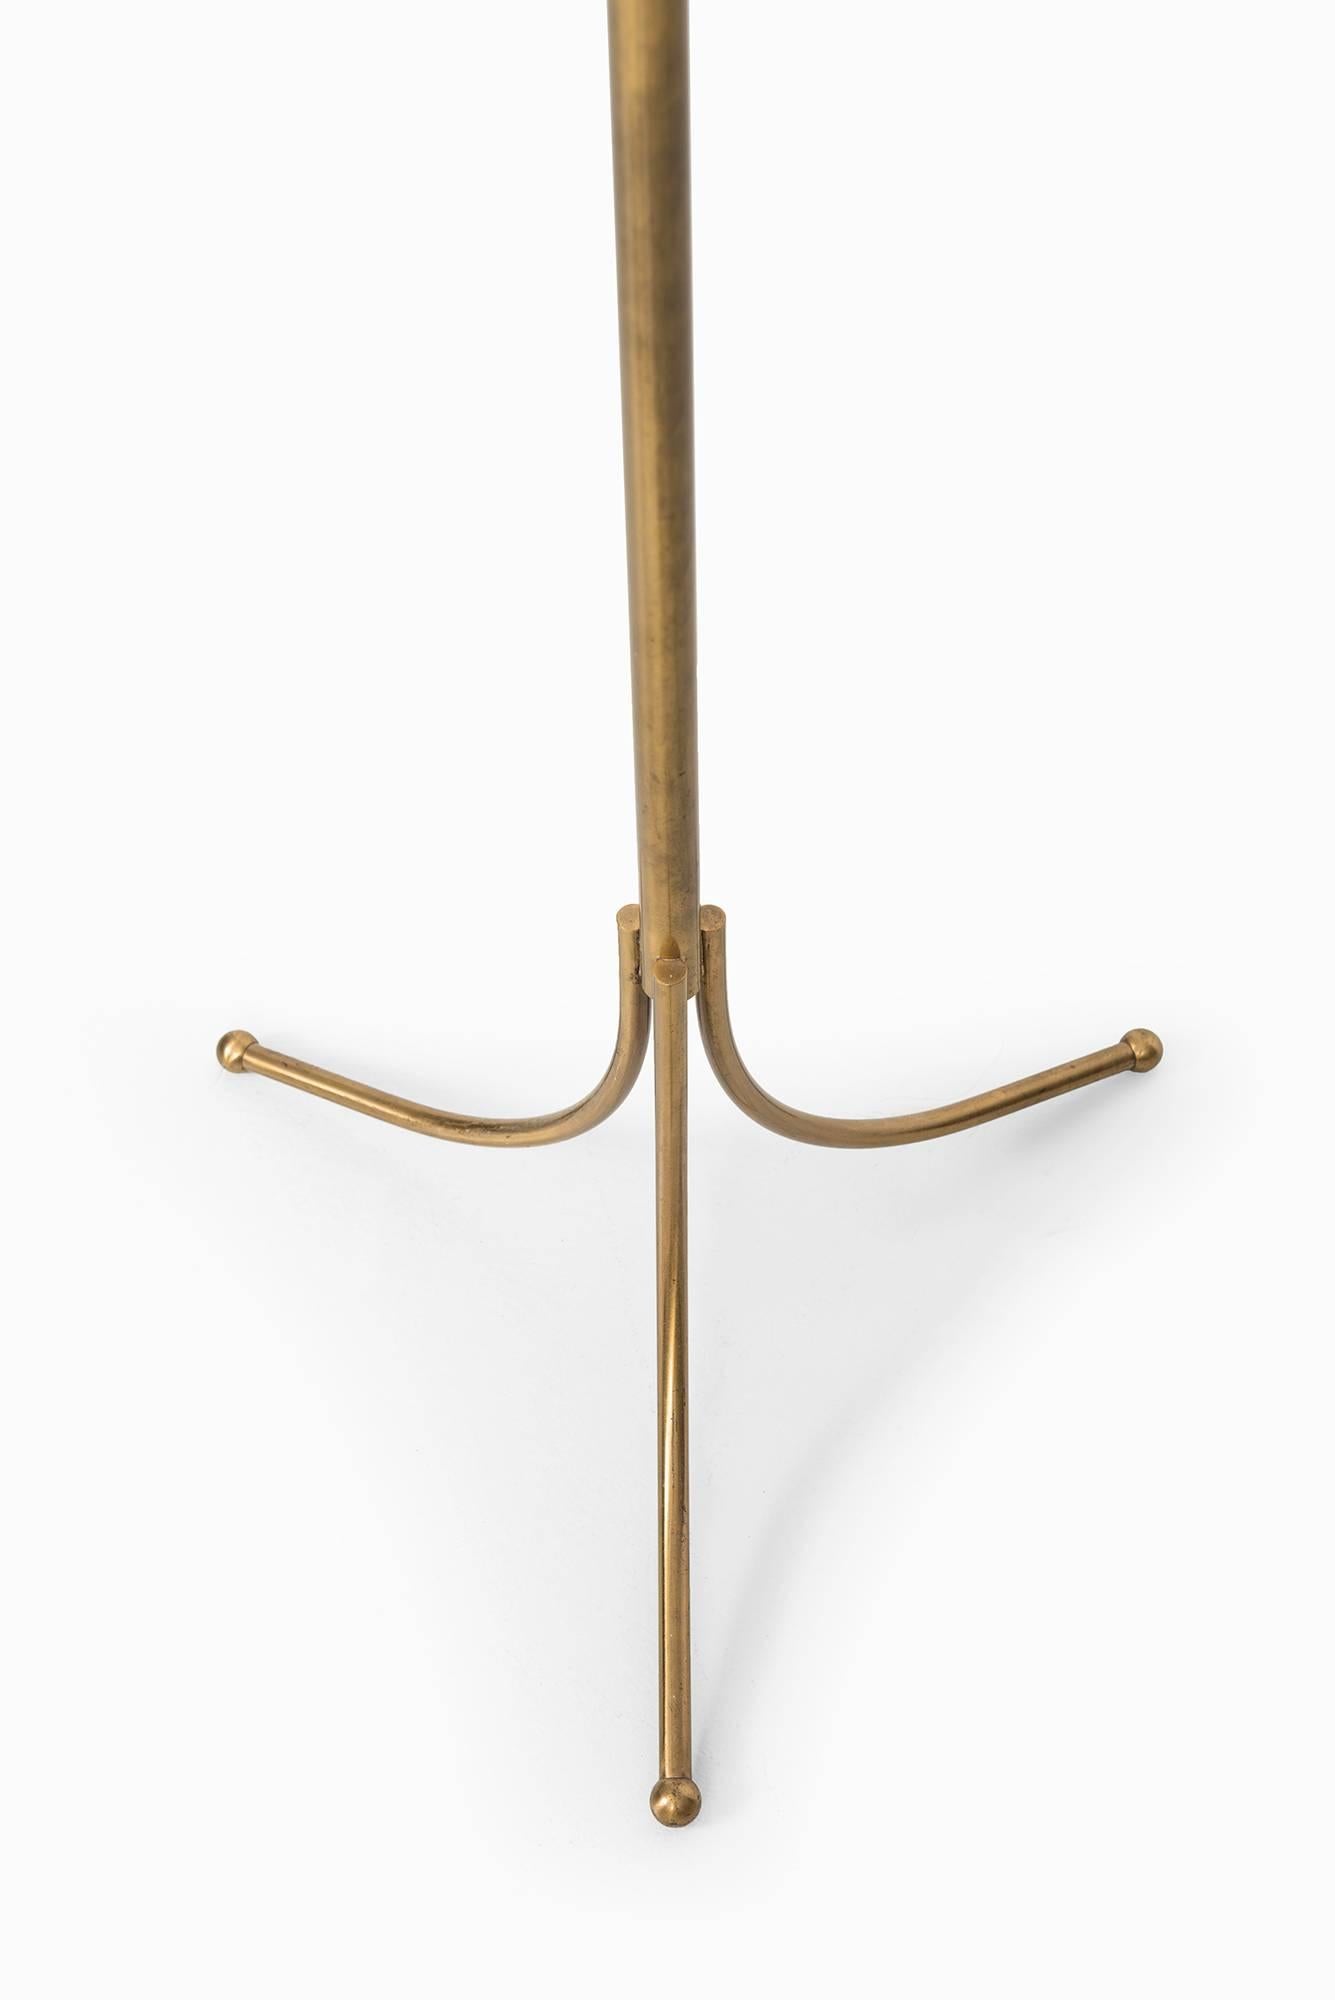 Height adjustable floor lamp model 1842 designed by Josef Frank. Produced by Svenskt Tenn in Sweden. Please note: This will be sold without any lamp shade.